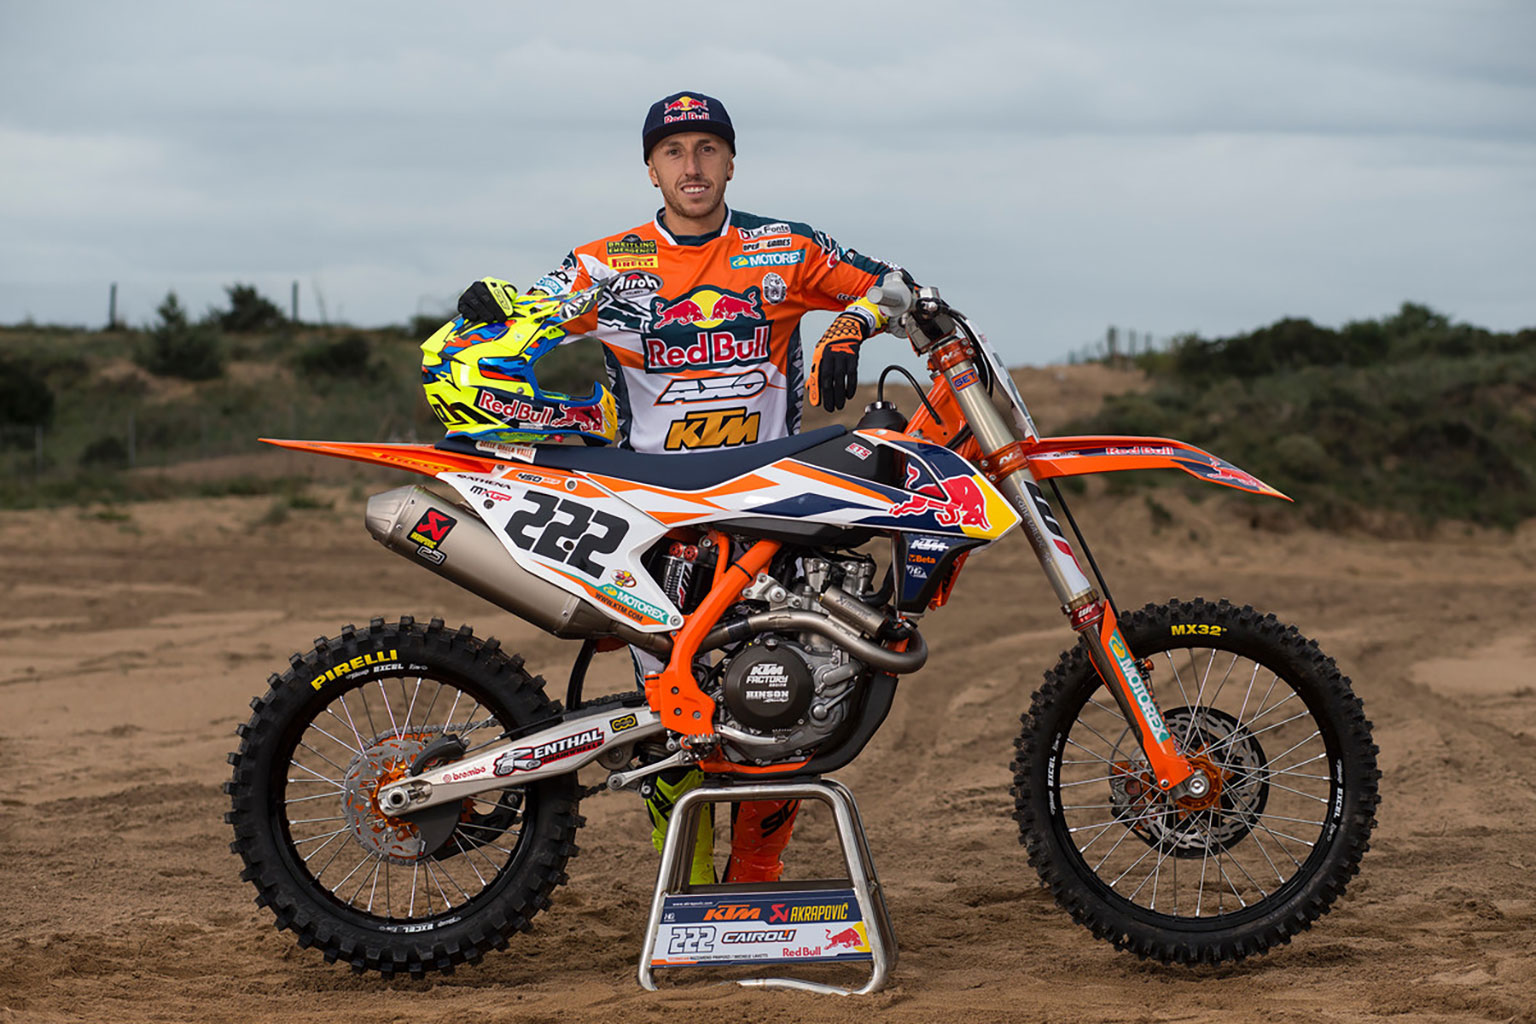 Tony Cairoli and his 450 factory bike will be at the show